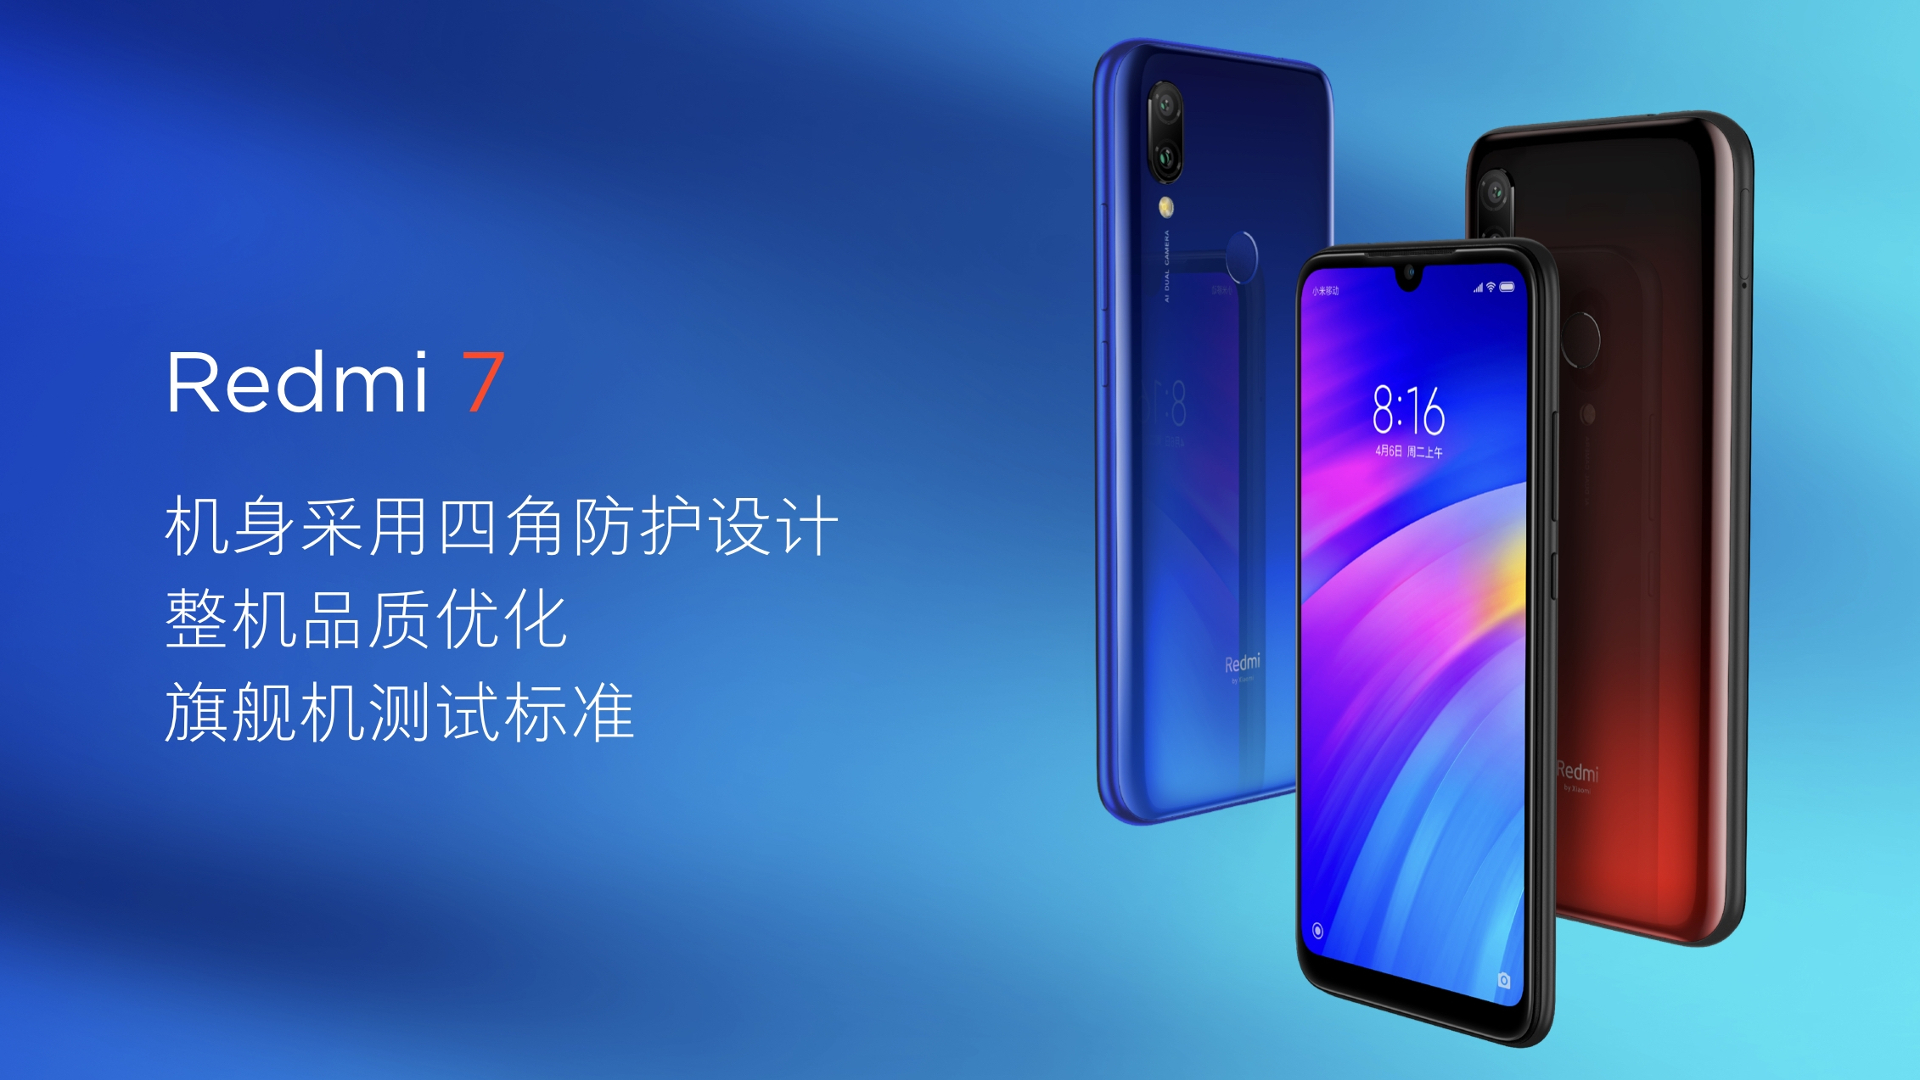 Promotional photo of the Xiaomi Redmi 7 models in various colors.